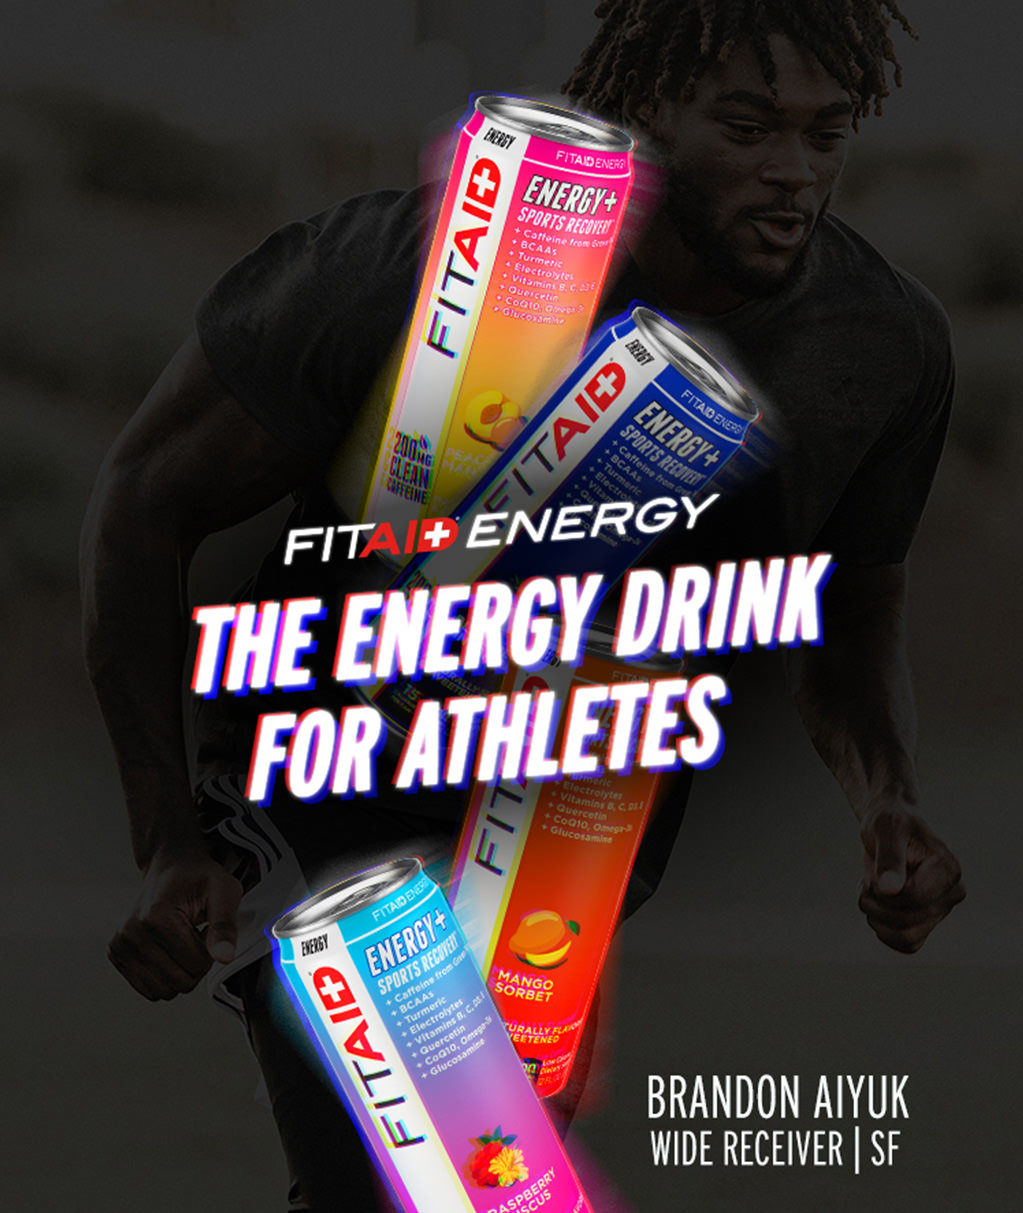 FITAID Energy - The energy drink for athletes